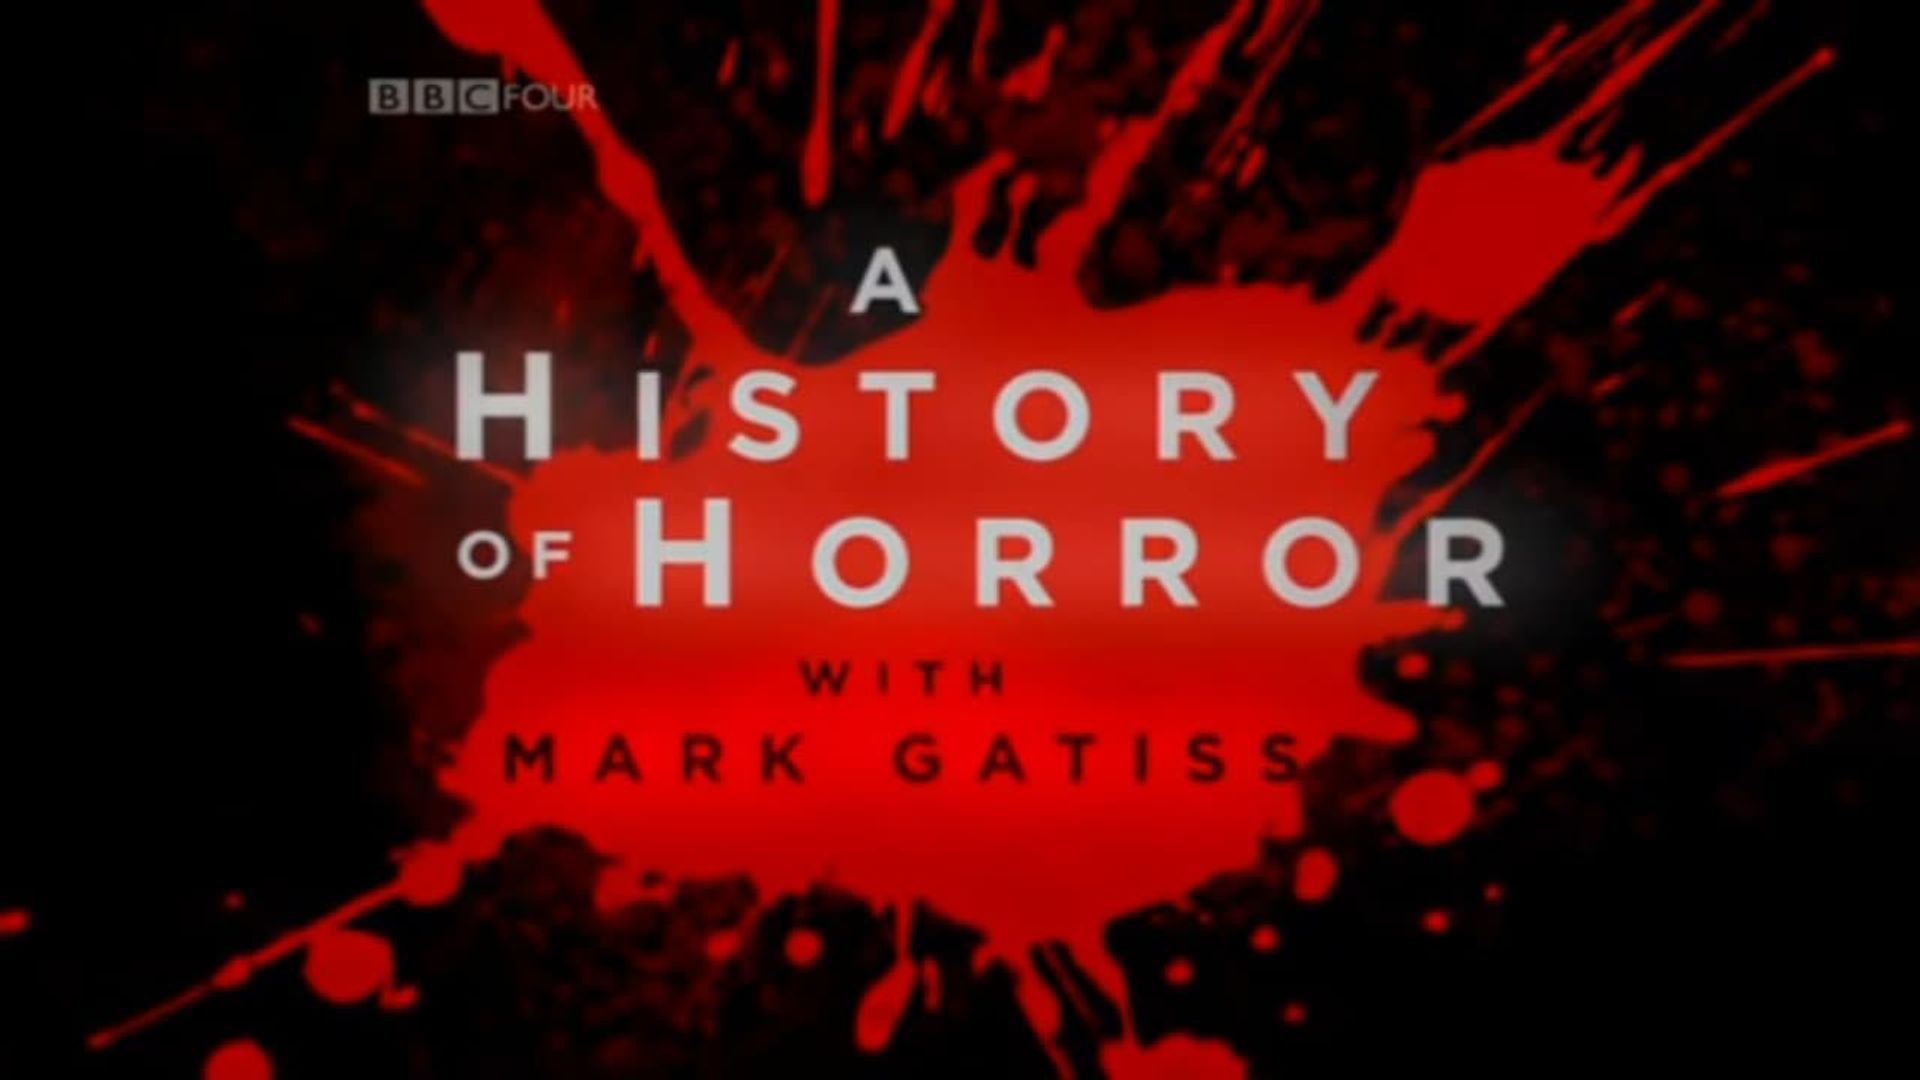 A History of Horror with Mark Gatiss background